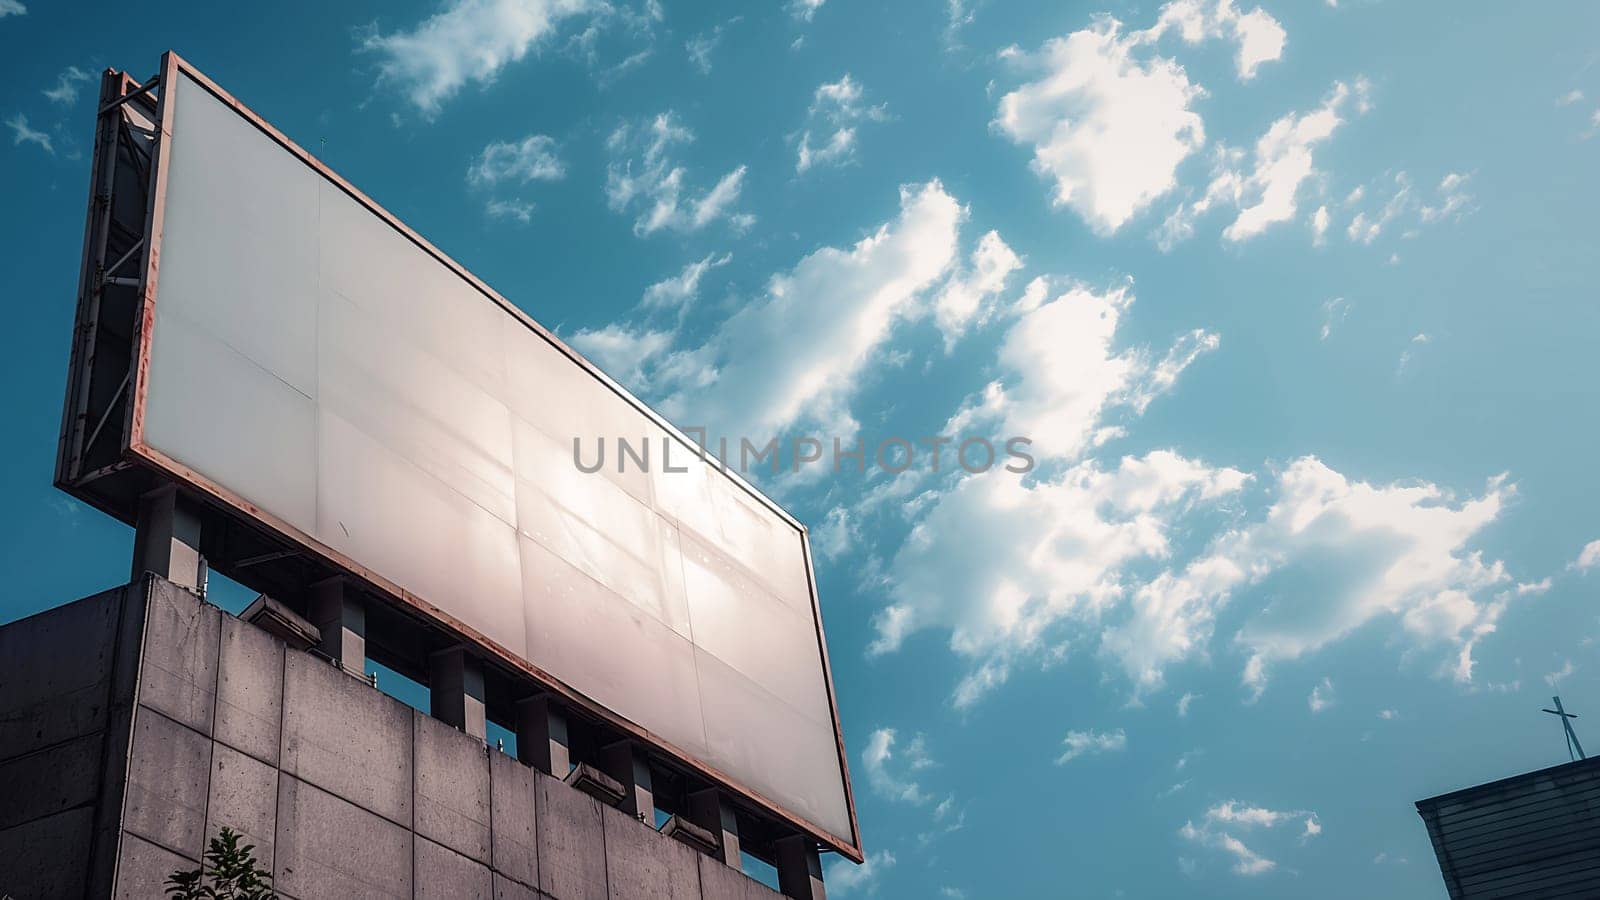 Empty billboard ready for advertising on a city building, with a bright blue sky backdrop, ideal for branding mockups